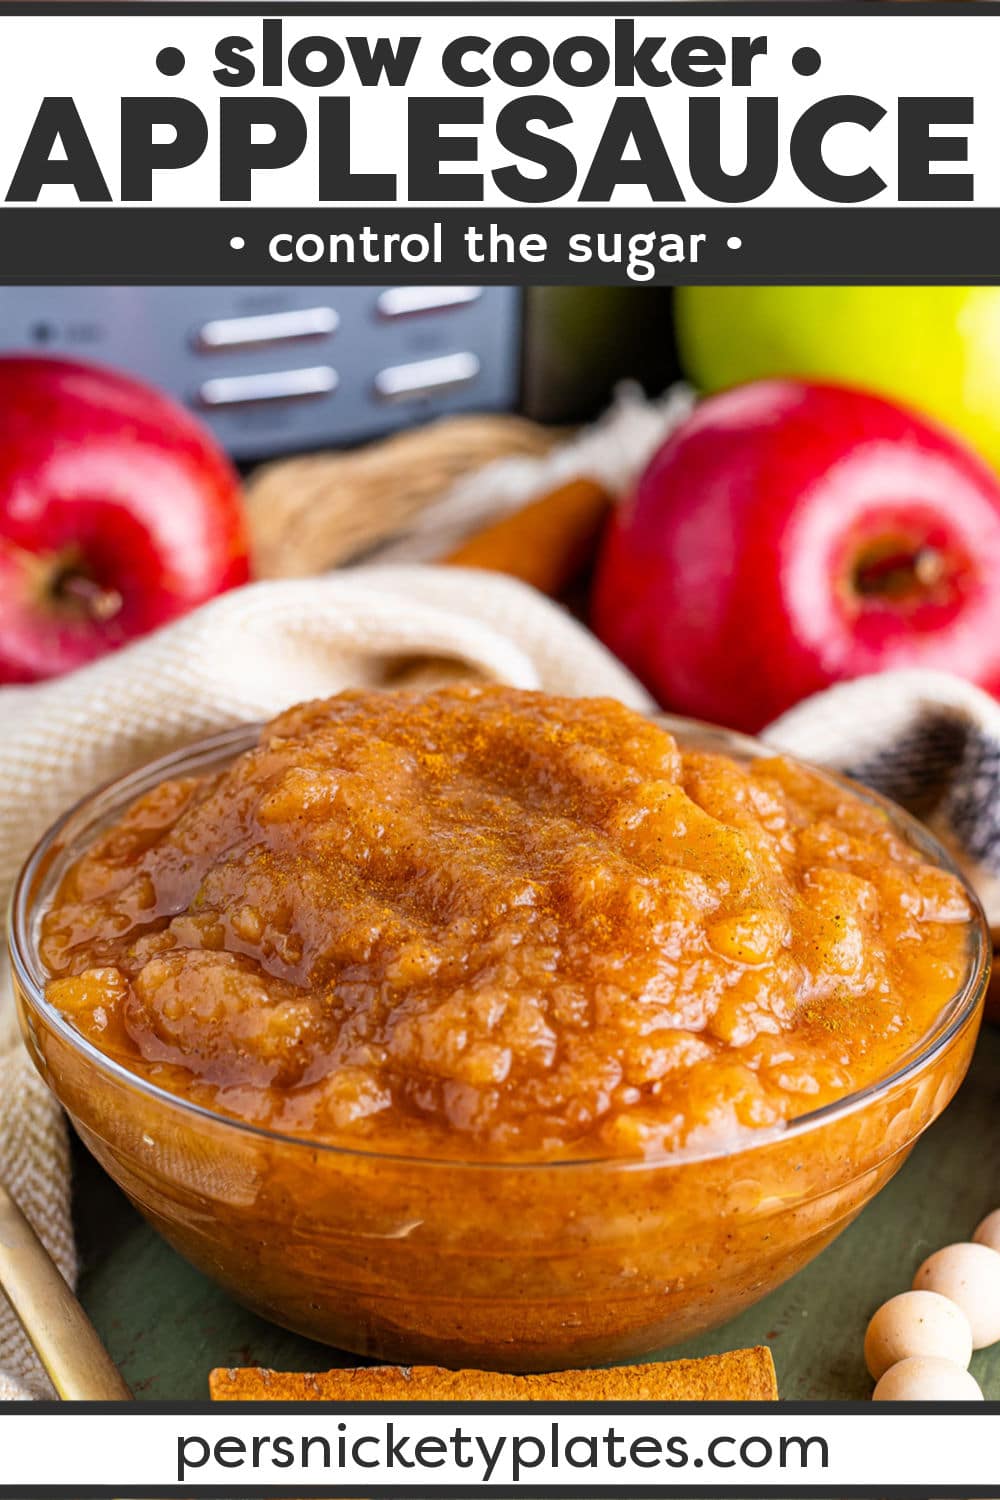 The aroma of cooked apples and cinnamon that fills your house is enough to want to make this Slow Cooker Applesauce made without sugar time and again. It is an easy dump-and-set recipe that is truly hands-off, other than peeling the apples, then the crock pot works its magic to deliver the best applesauce! | www.persnicketyplates.com